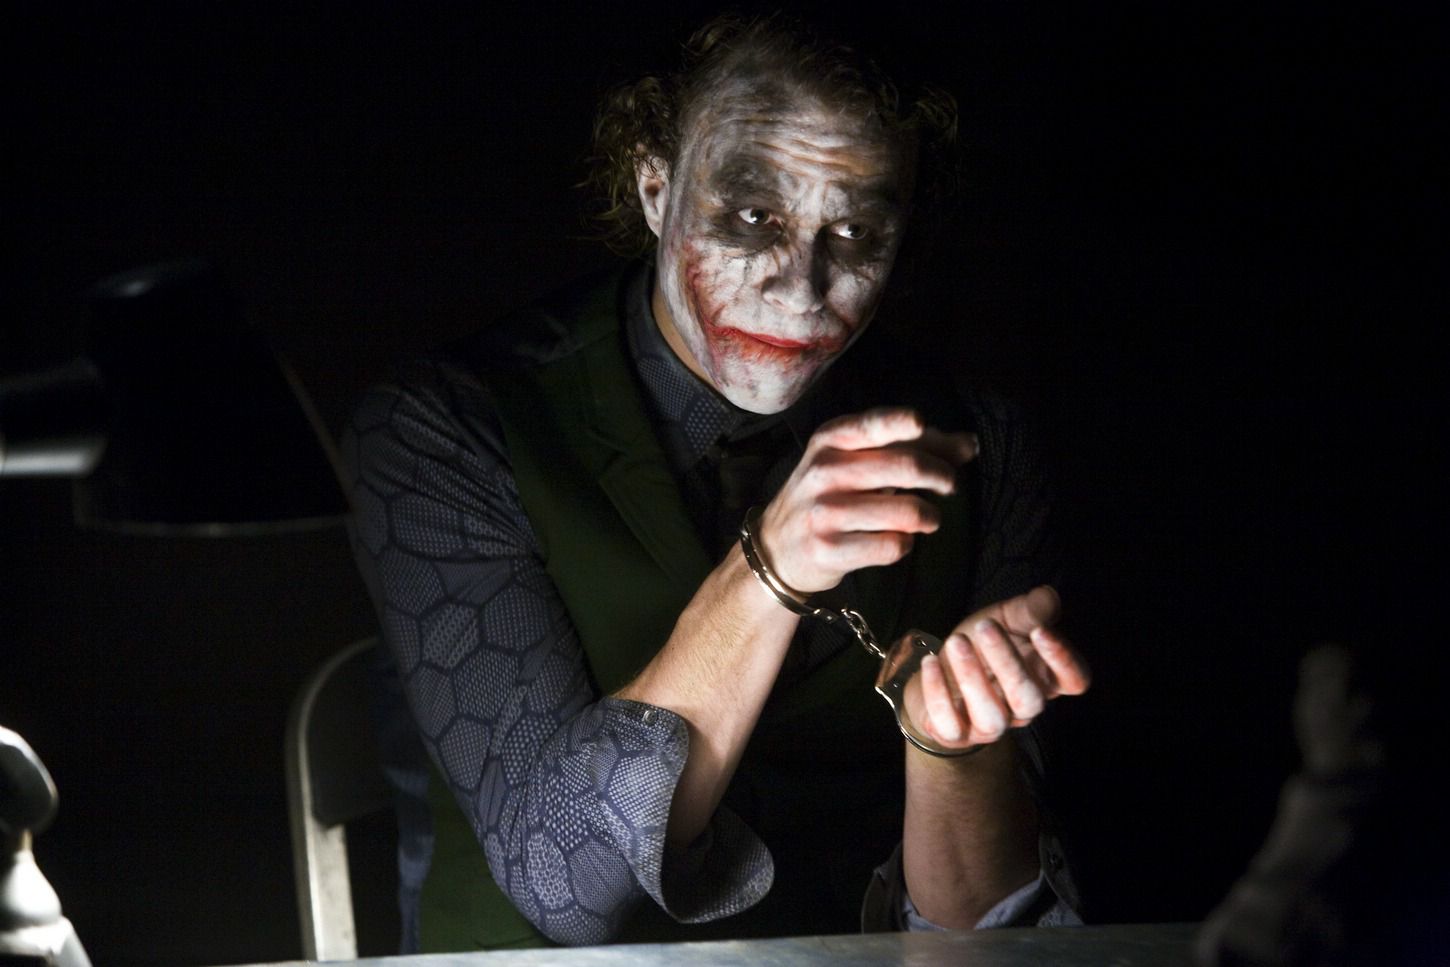 Was Heath Ledger's Joker inspired by Sid Vicious?